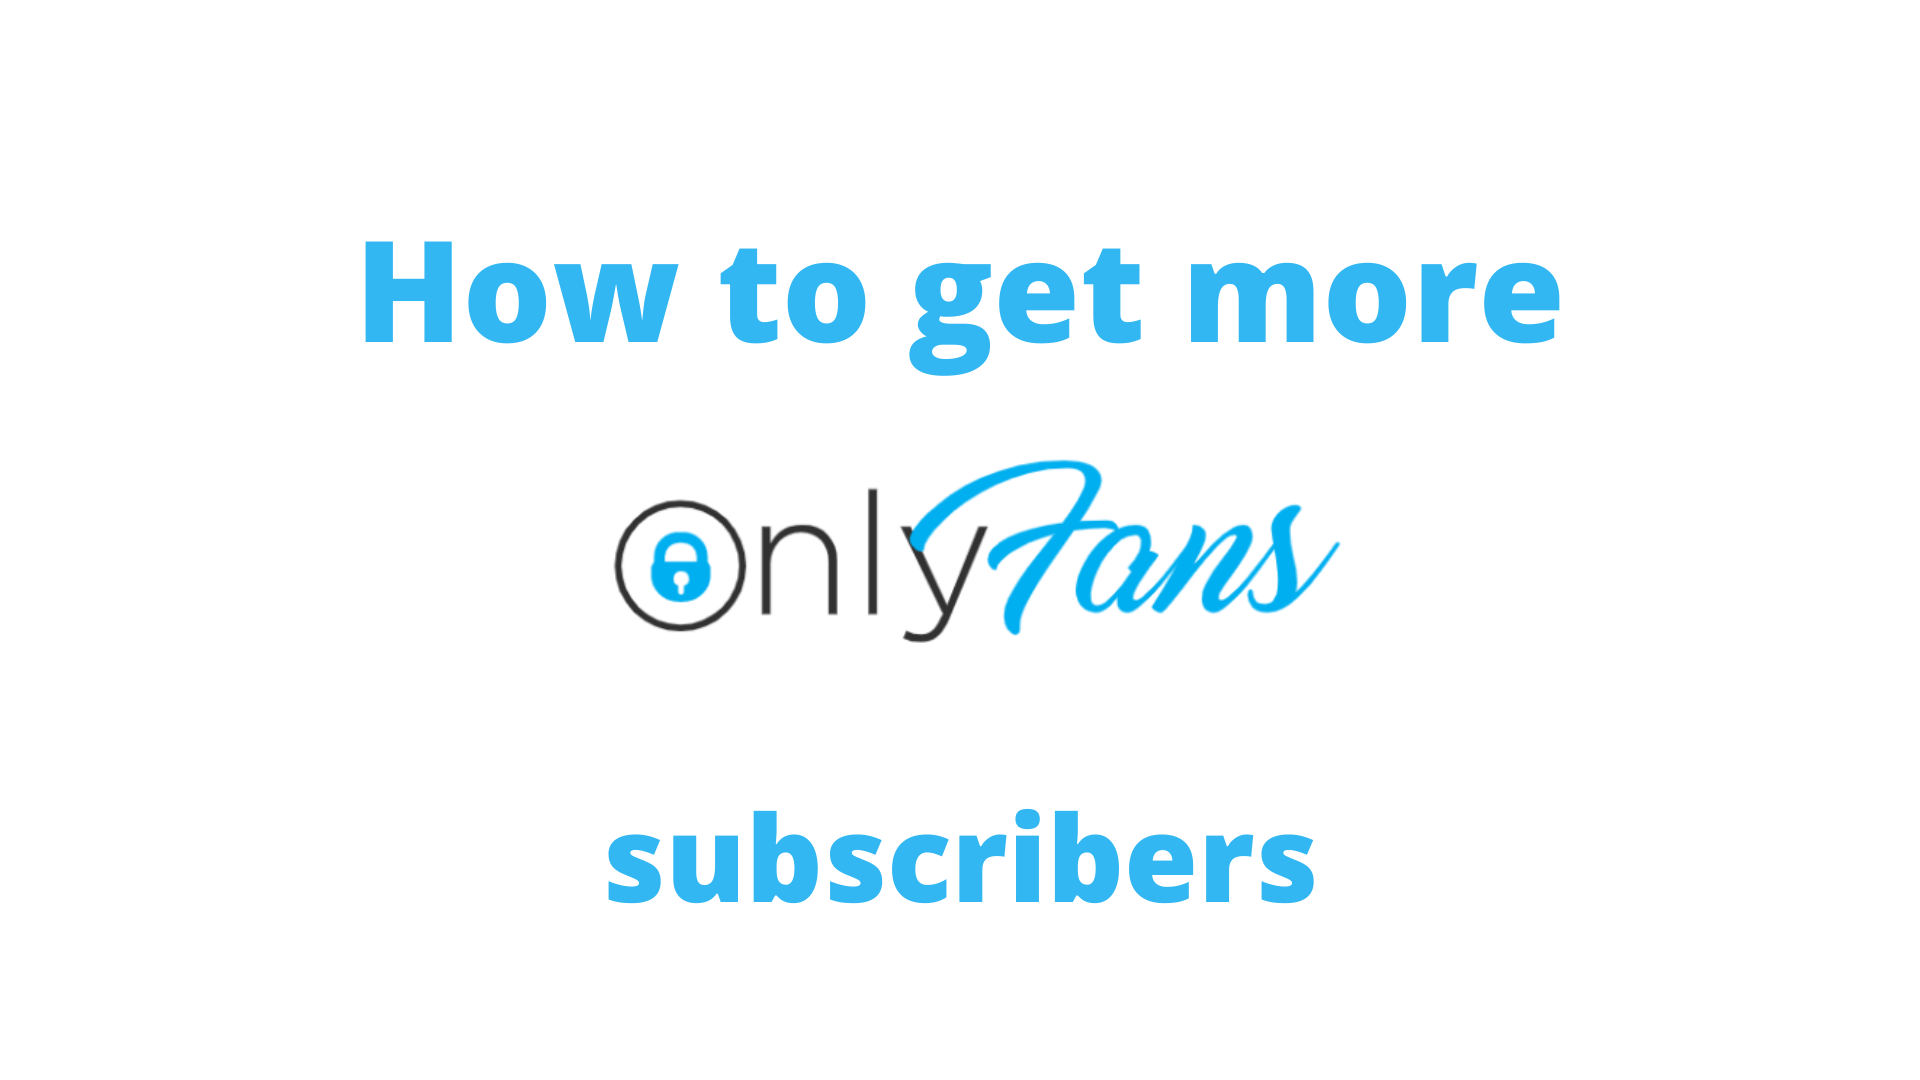 Unsubscribe fans to how only How to